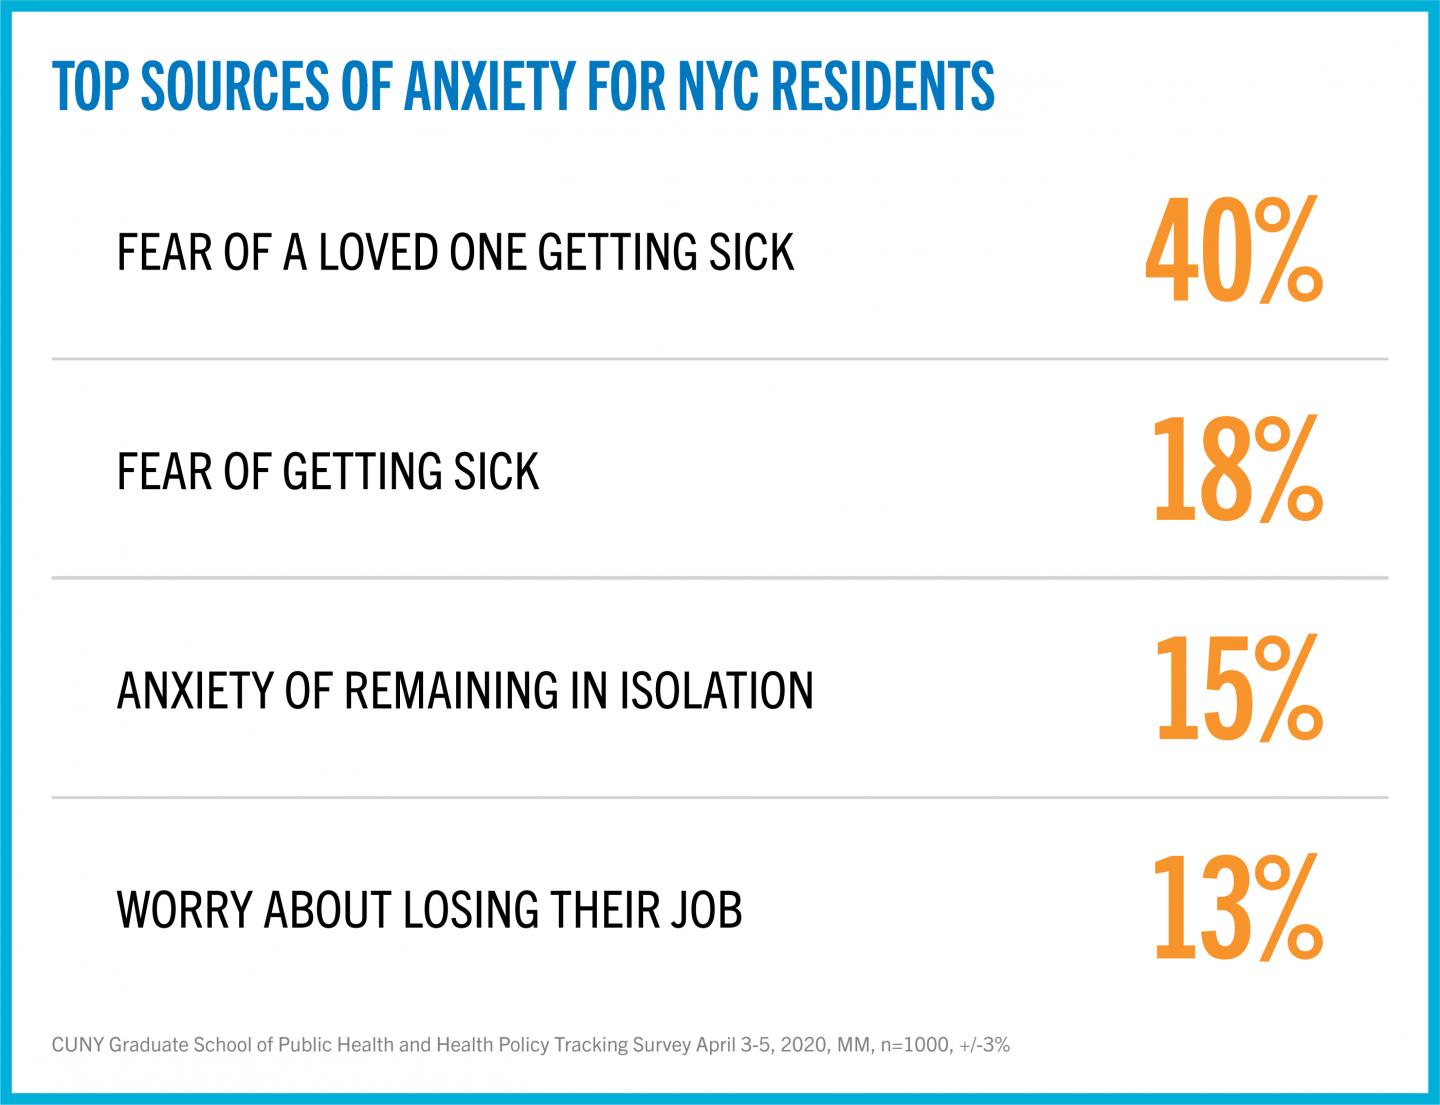 Top Sources of Anxiety for NYC Residents